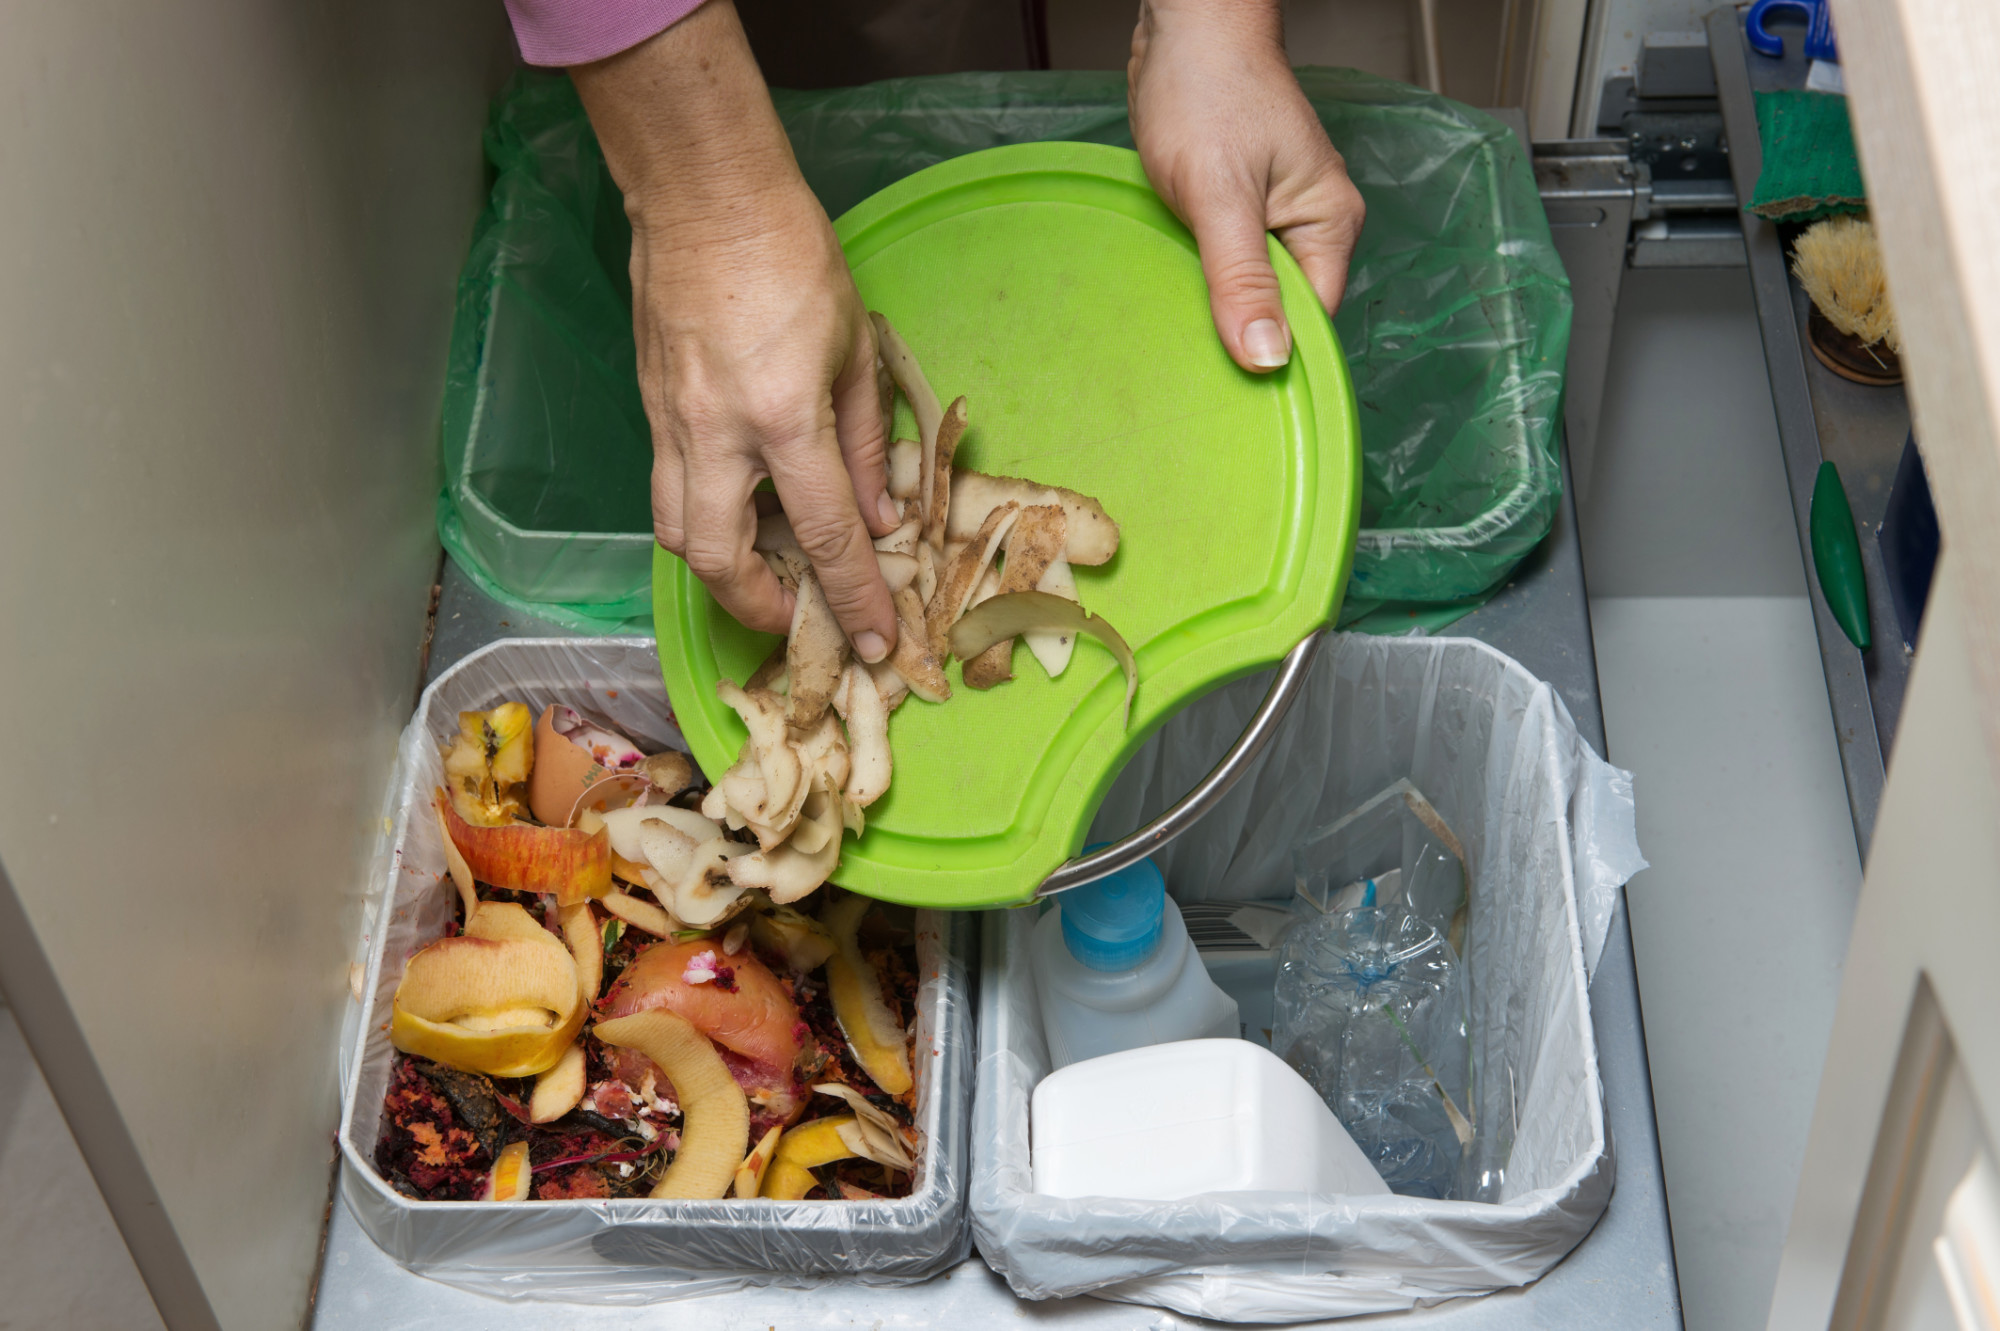 Food waste recycling not always the best idea